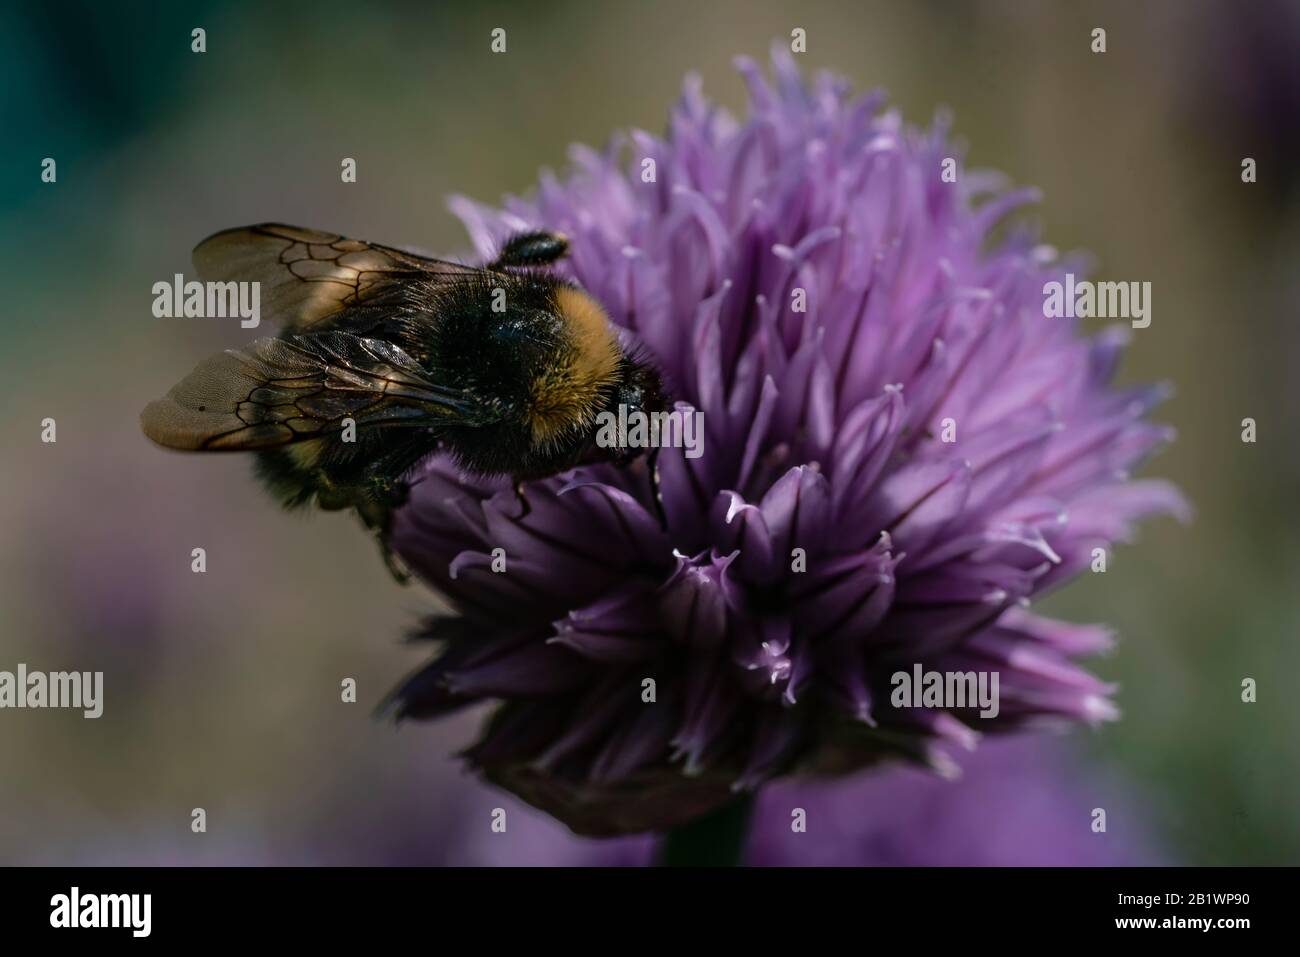 Bumblebee pollinating and looking for neсtar in blooming chive onion purple violet flower, sunny day, close up photo, bokeh Stock Photo